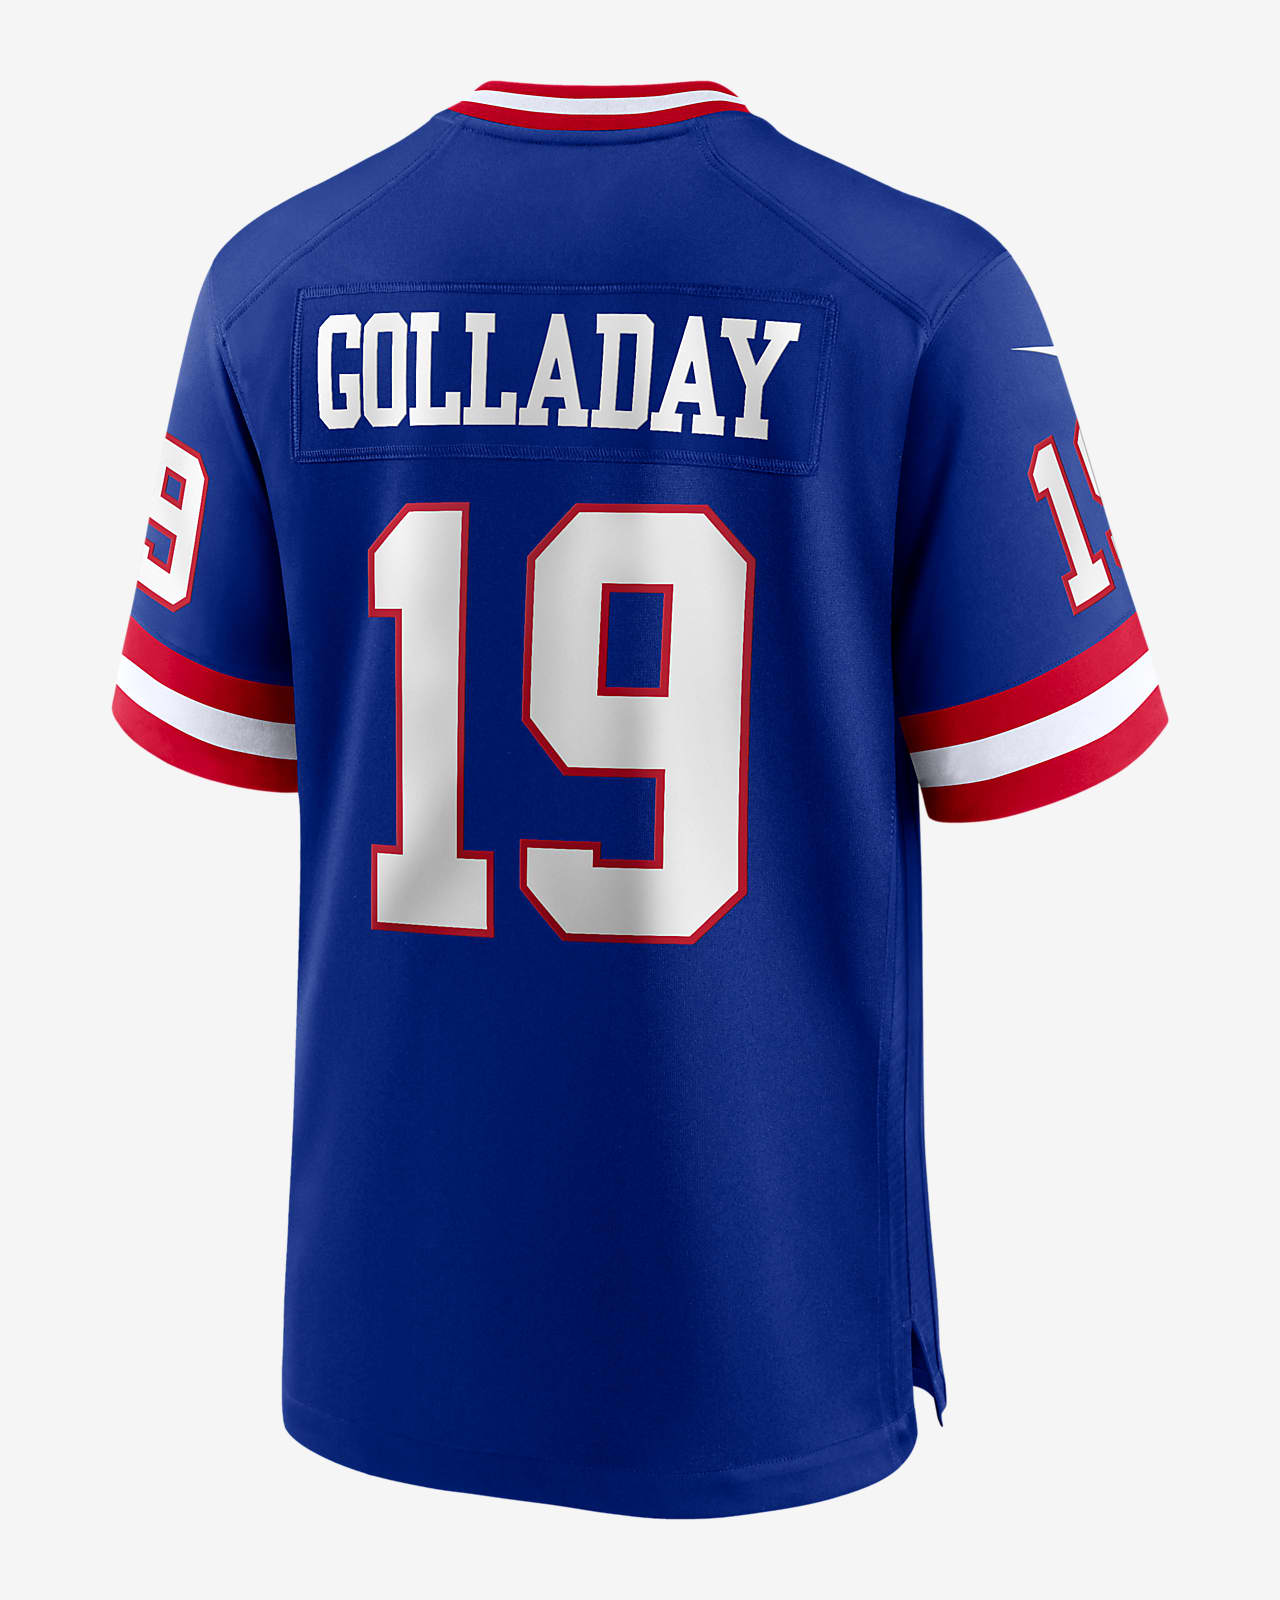 NFL New York Giants (Kenny Golladay) Men's Game Football Jersey.